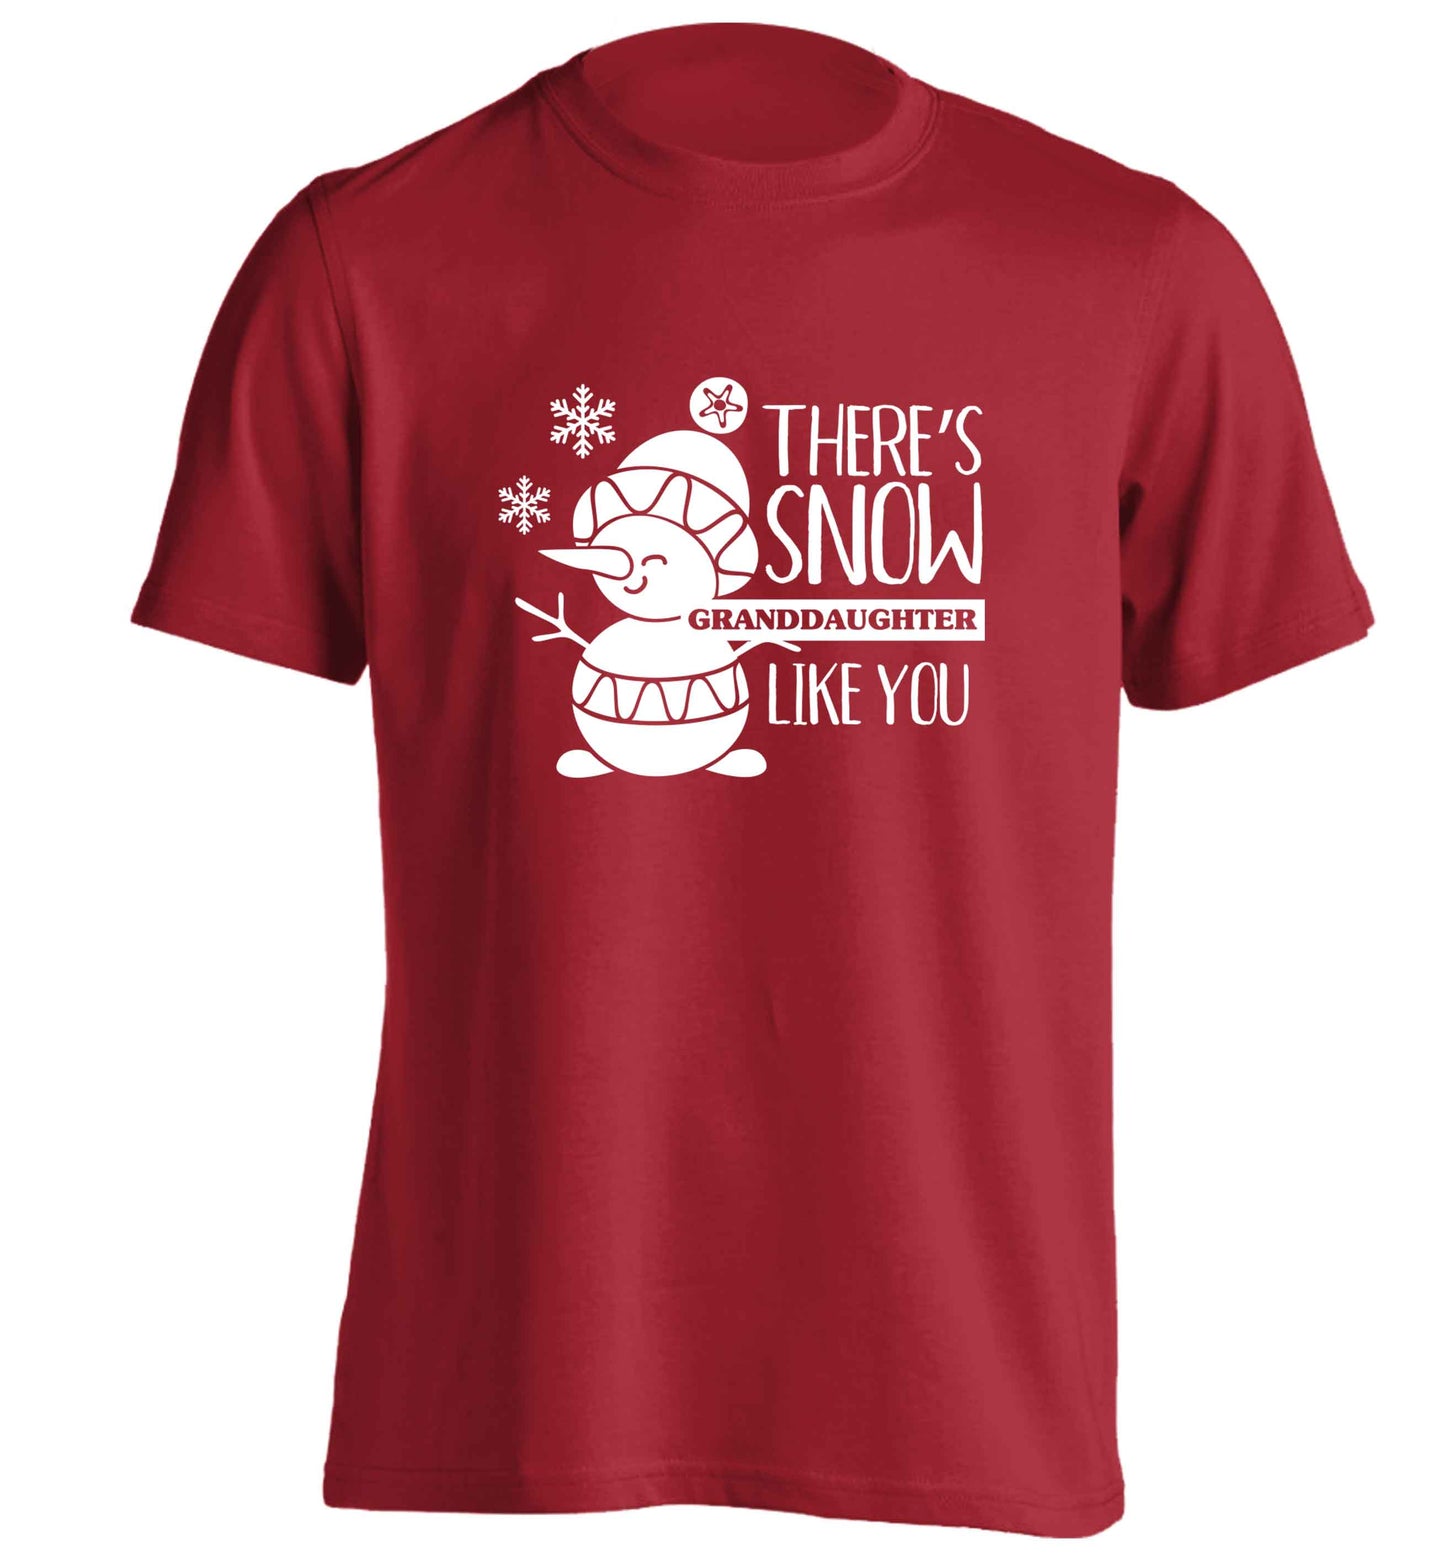 There's snow granddaughter like you adults unisex red Tshirt 2XL